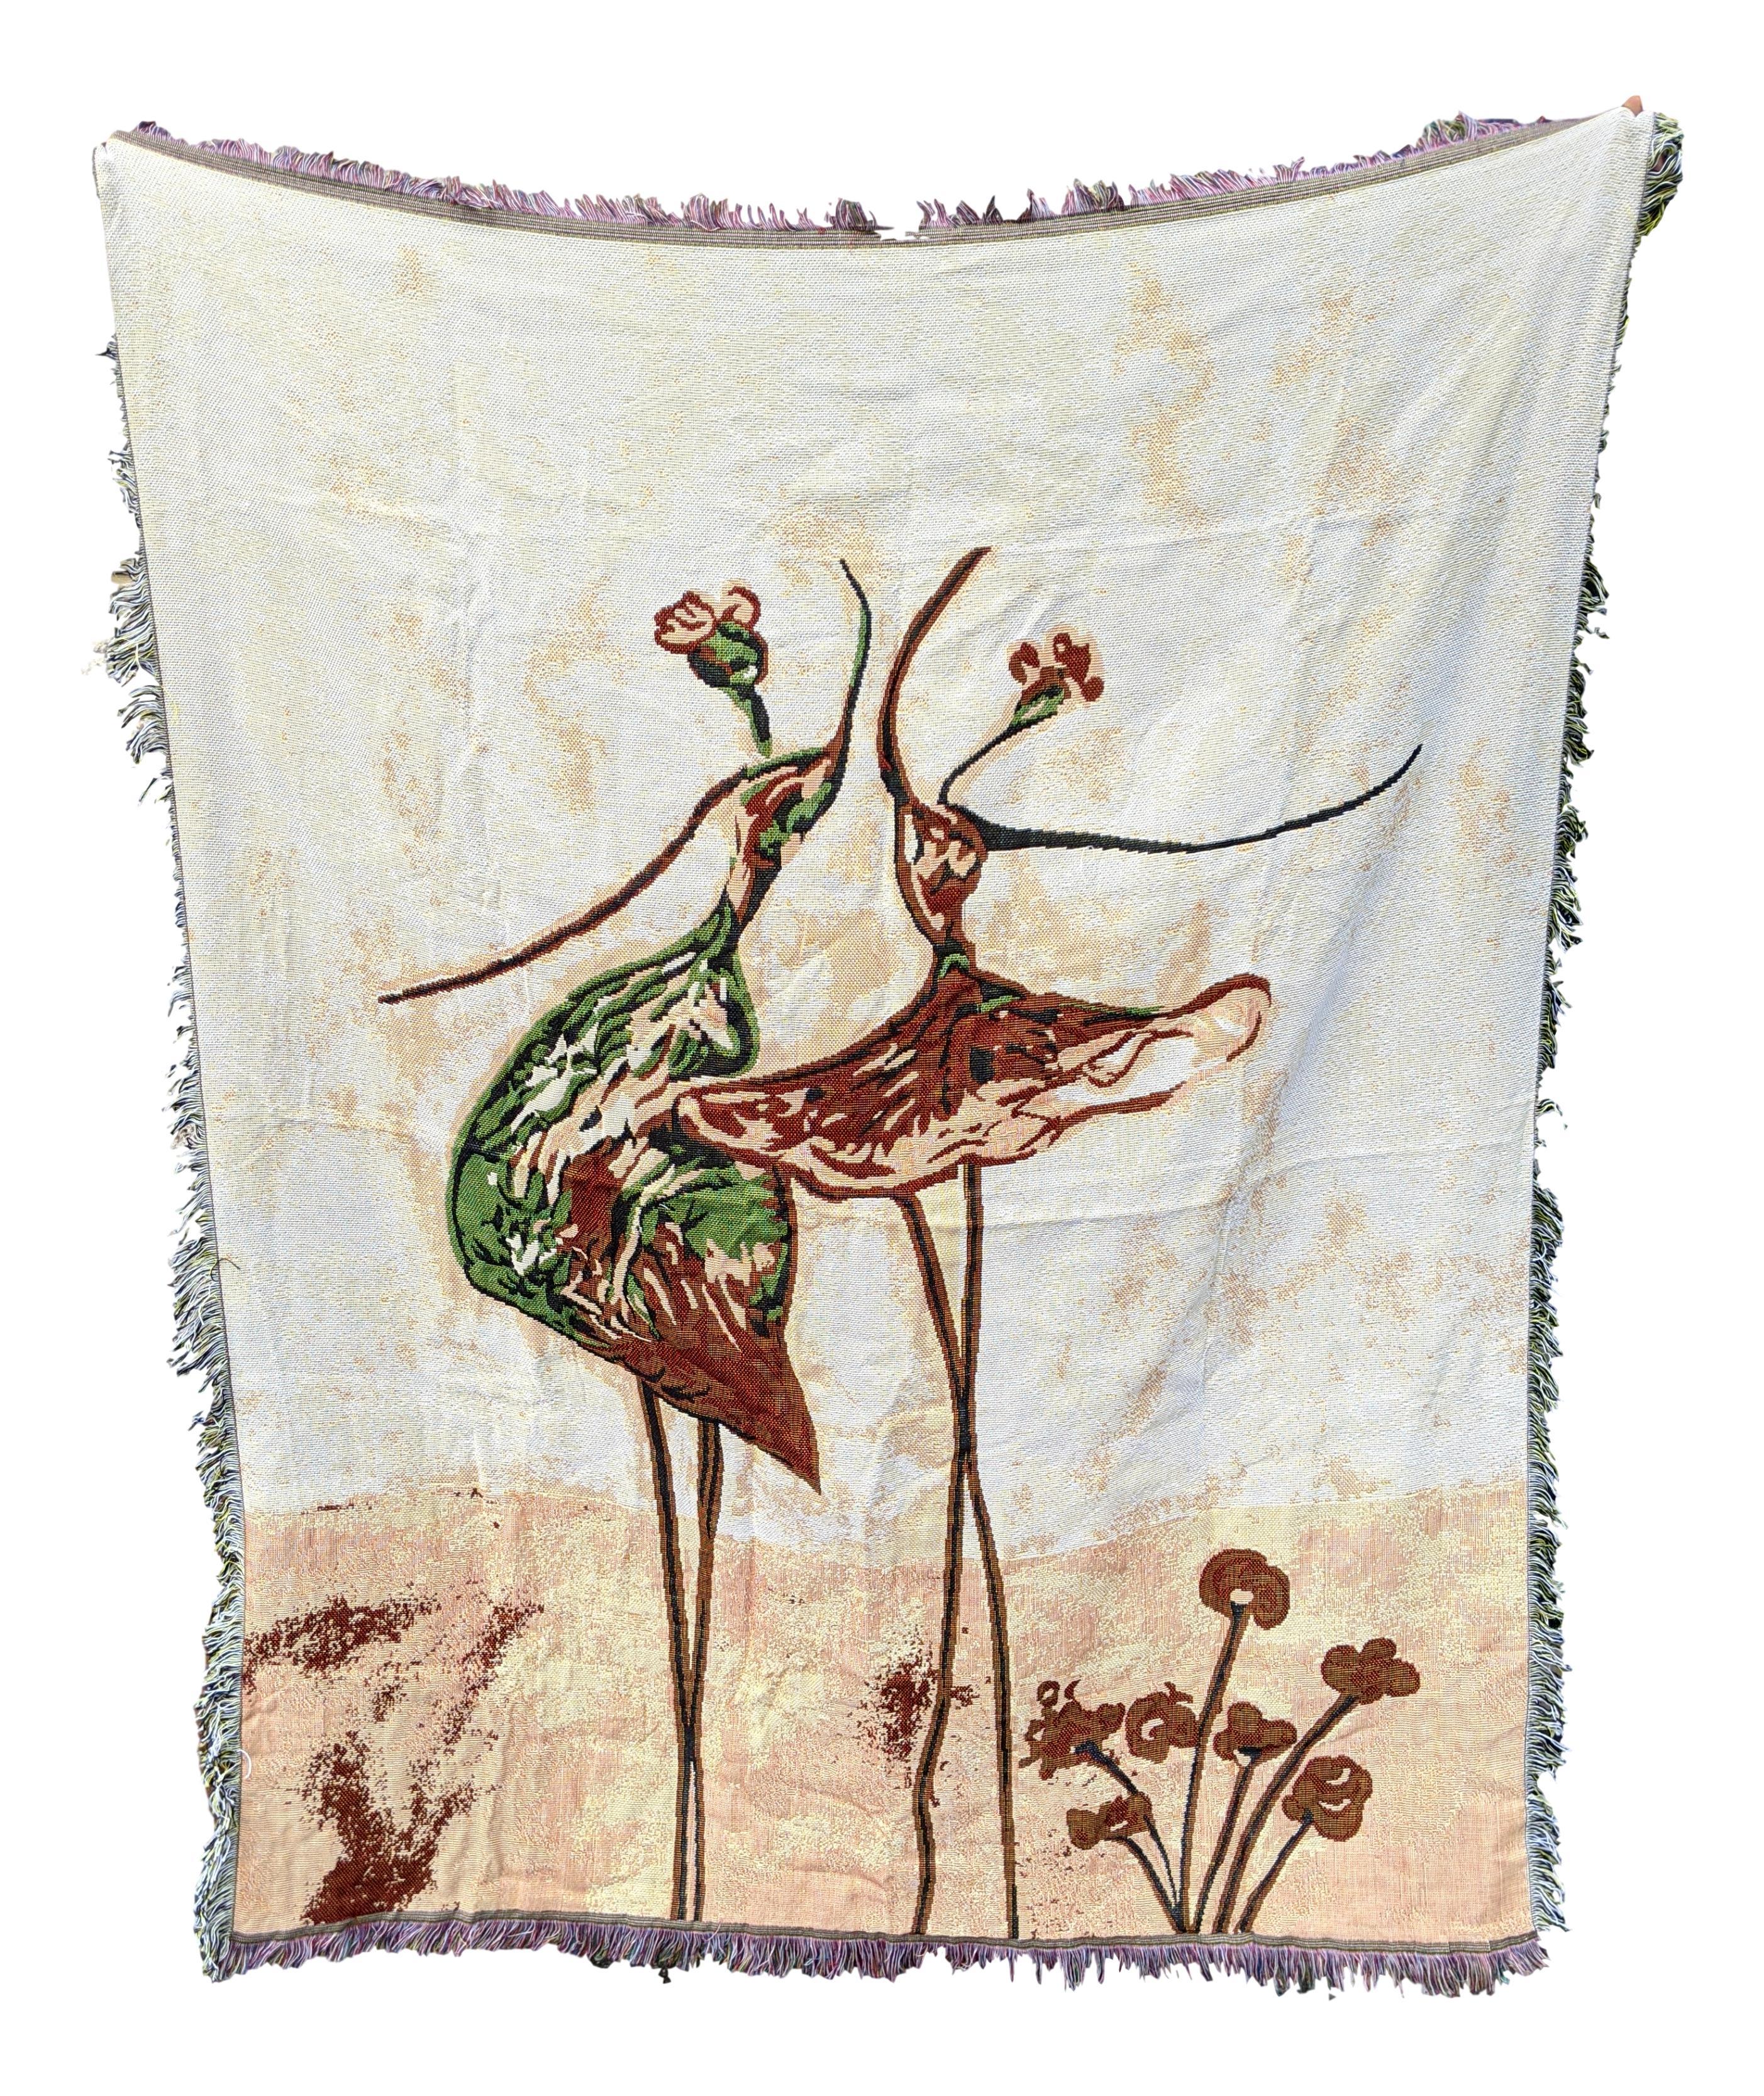 Tache Abstract Art Ballet Dancers Afghan Tapestry Throw Blanket with Fringe (2500) - Tache Home Fashion